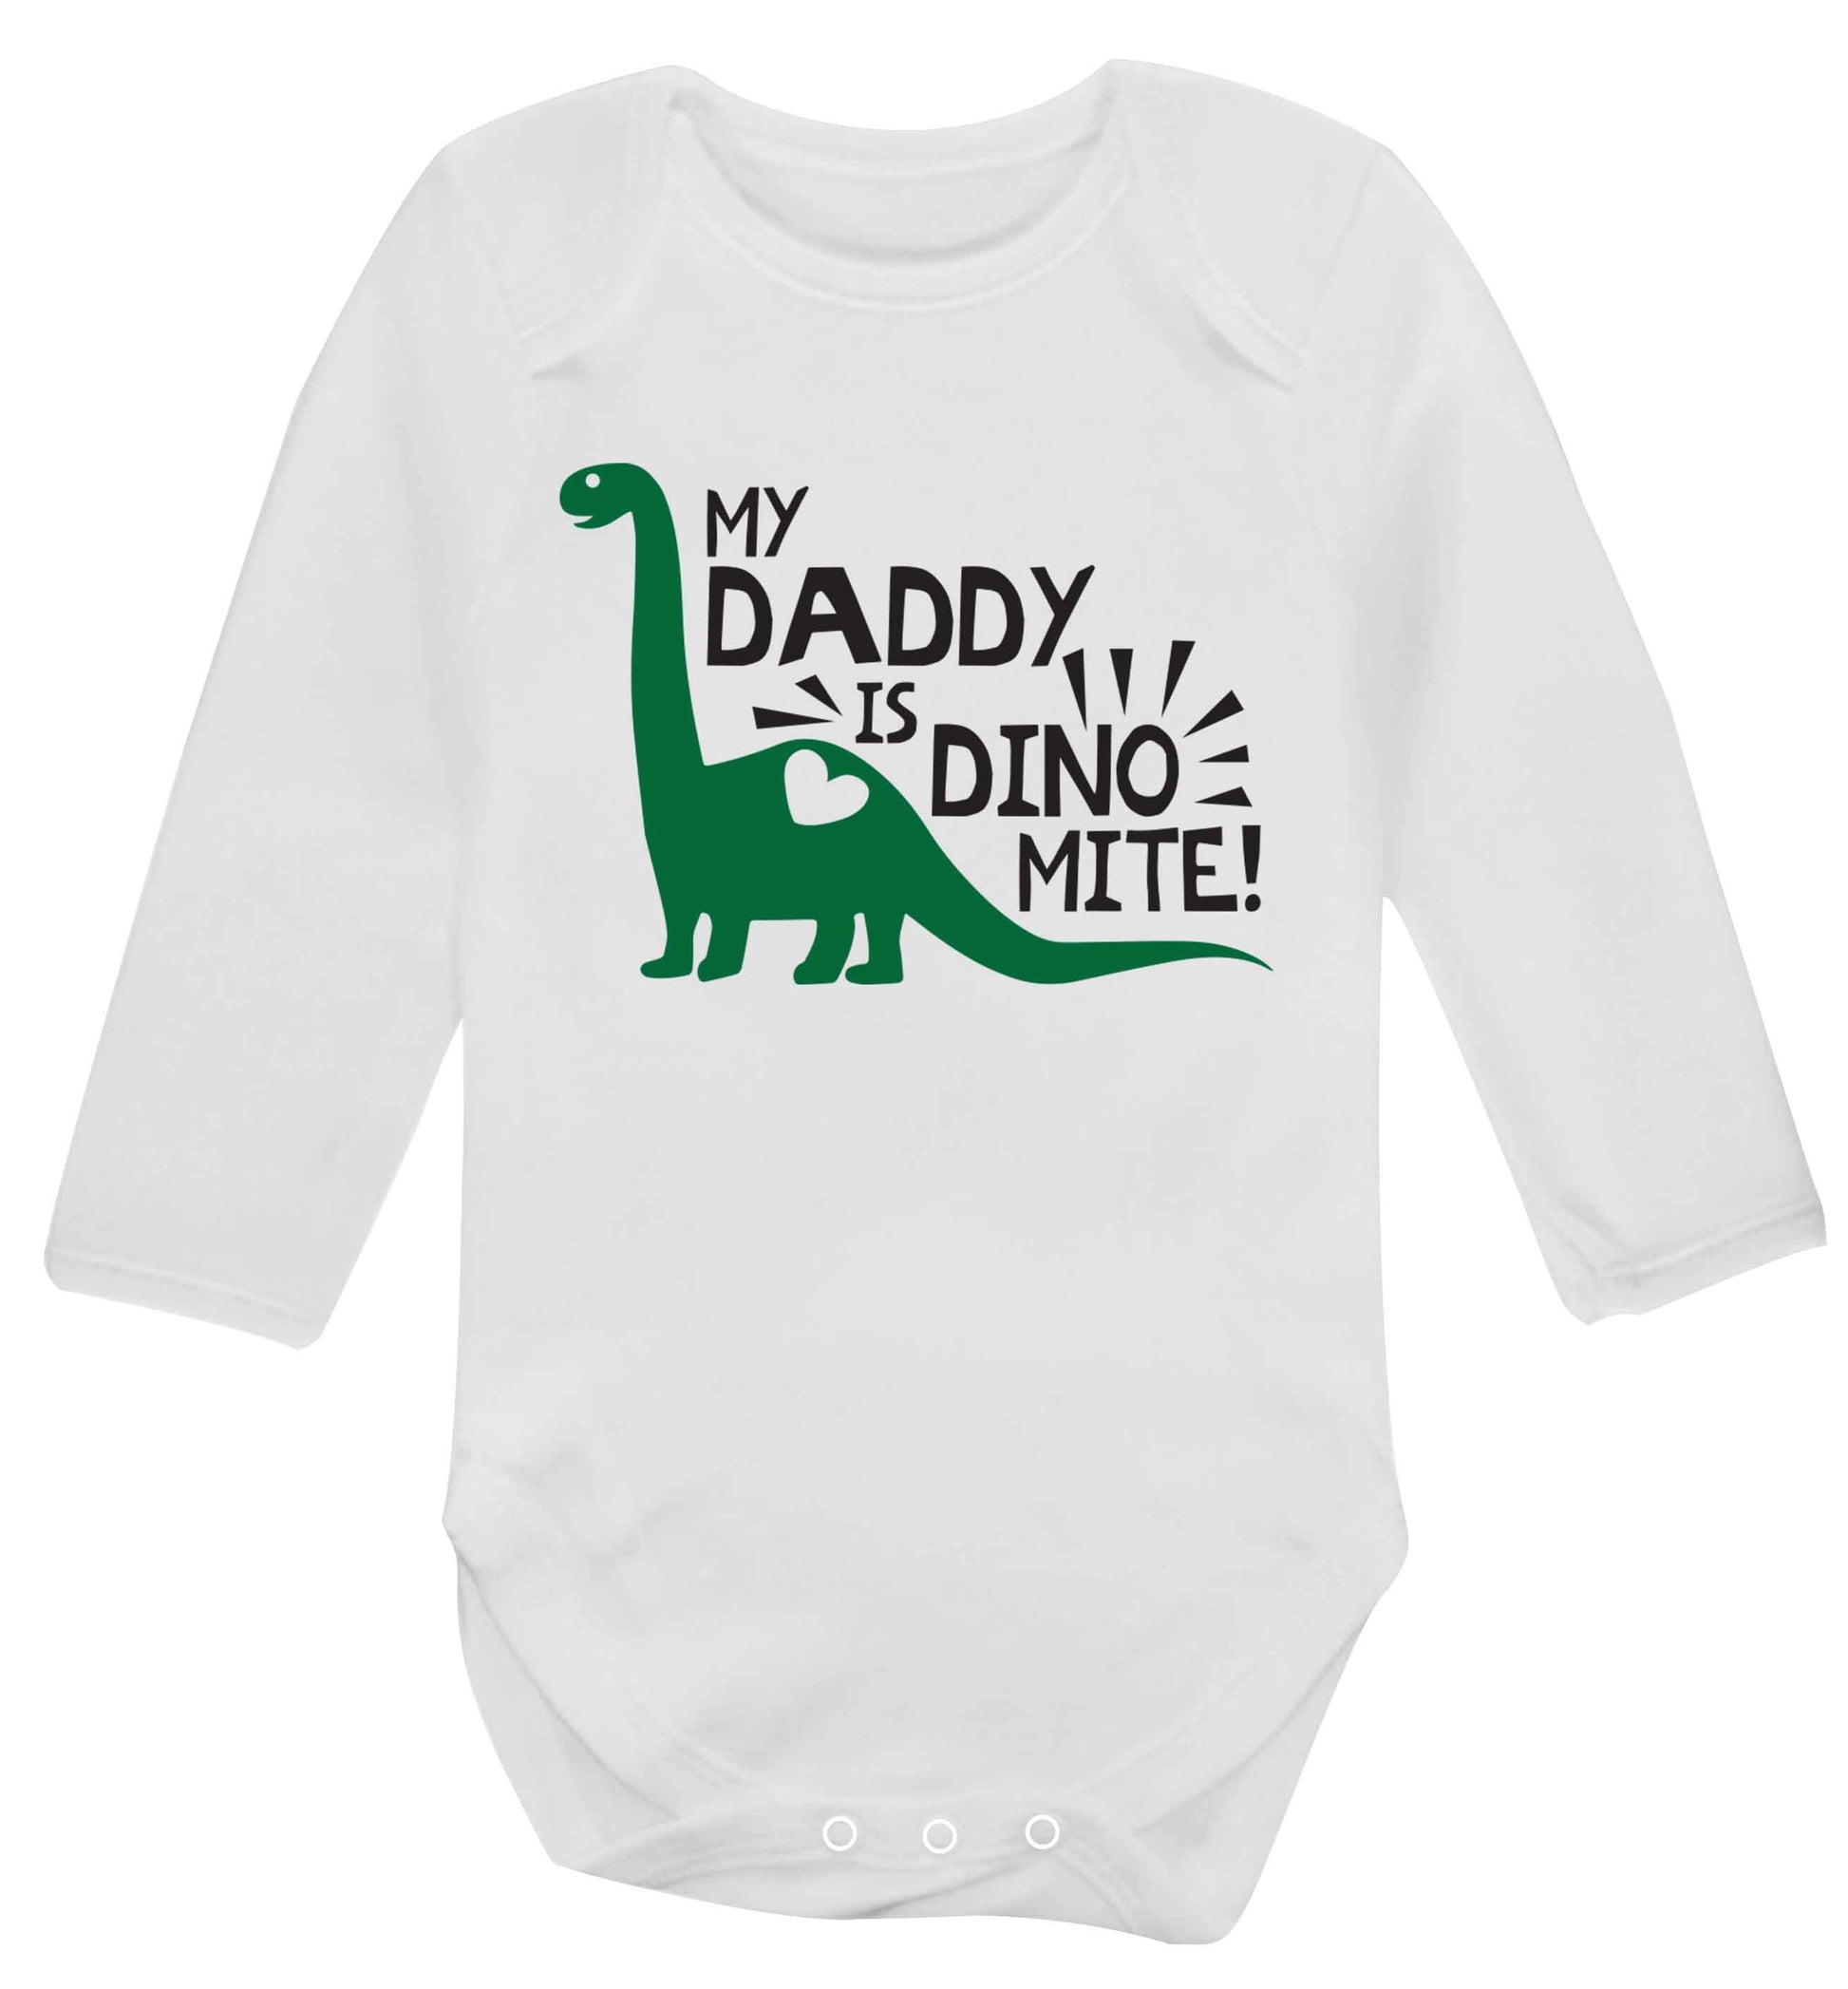 My daddy is dinomite! Baby Vest long sleeved white 6-12 months